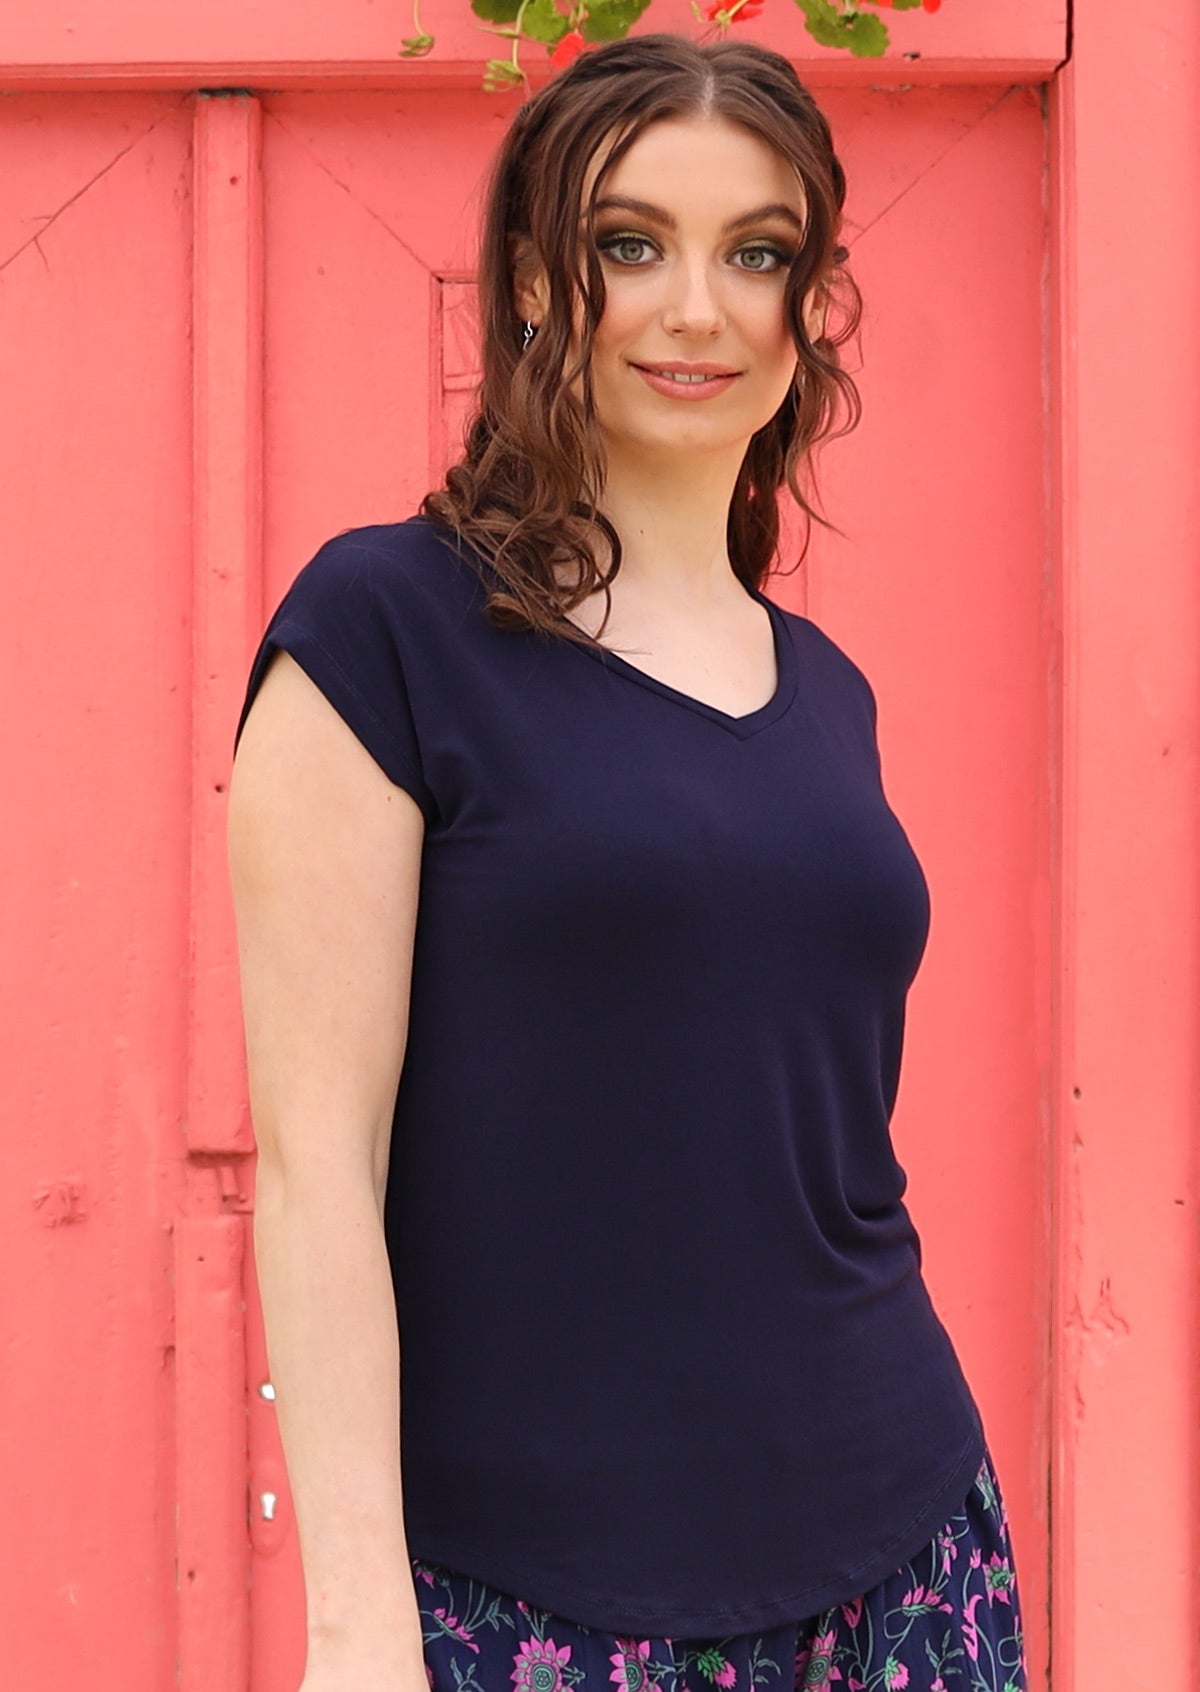 Woman wearing a navy blue v-neck short cap sleeve rayon top in front of a pink wall.